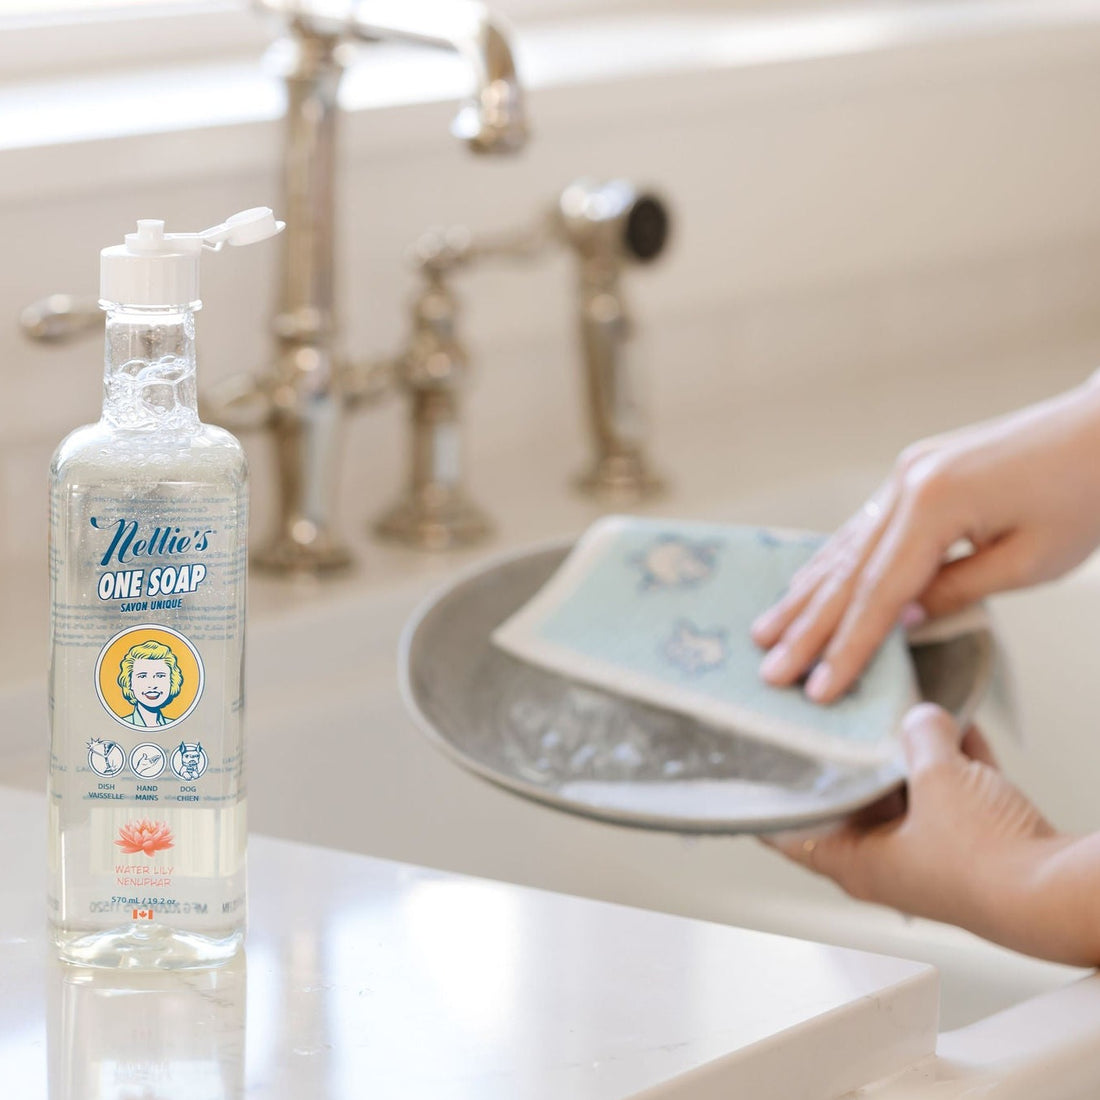 Nellie's multi-use One Soap washing dishes